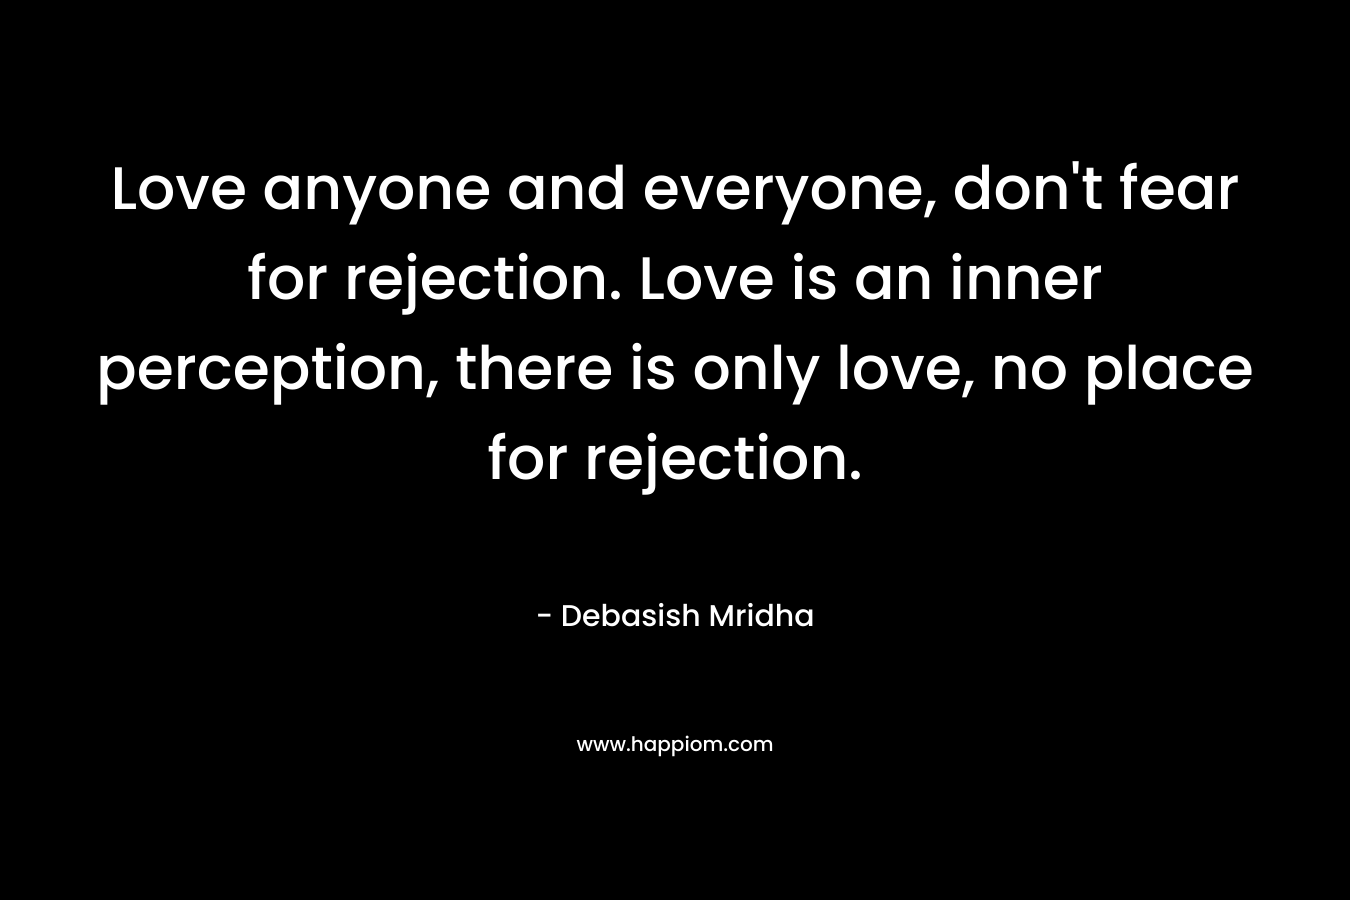 Love anyone and everyone, don't fear for rejection. Love is an inner perception, there is only love, no place for rejection.